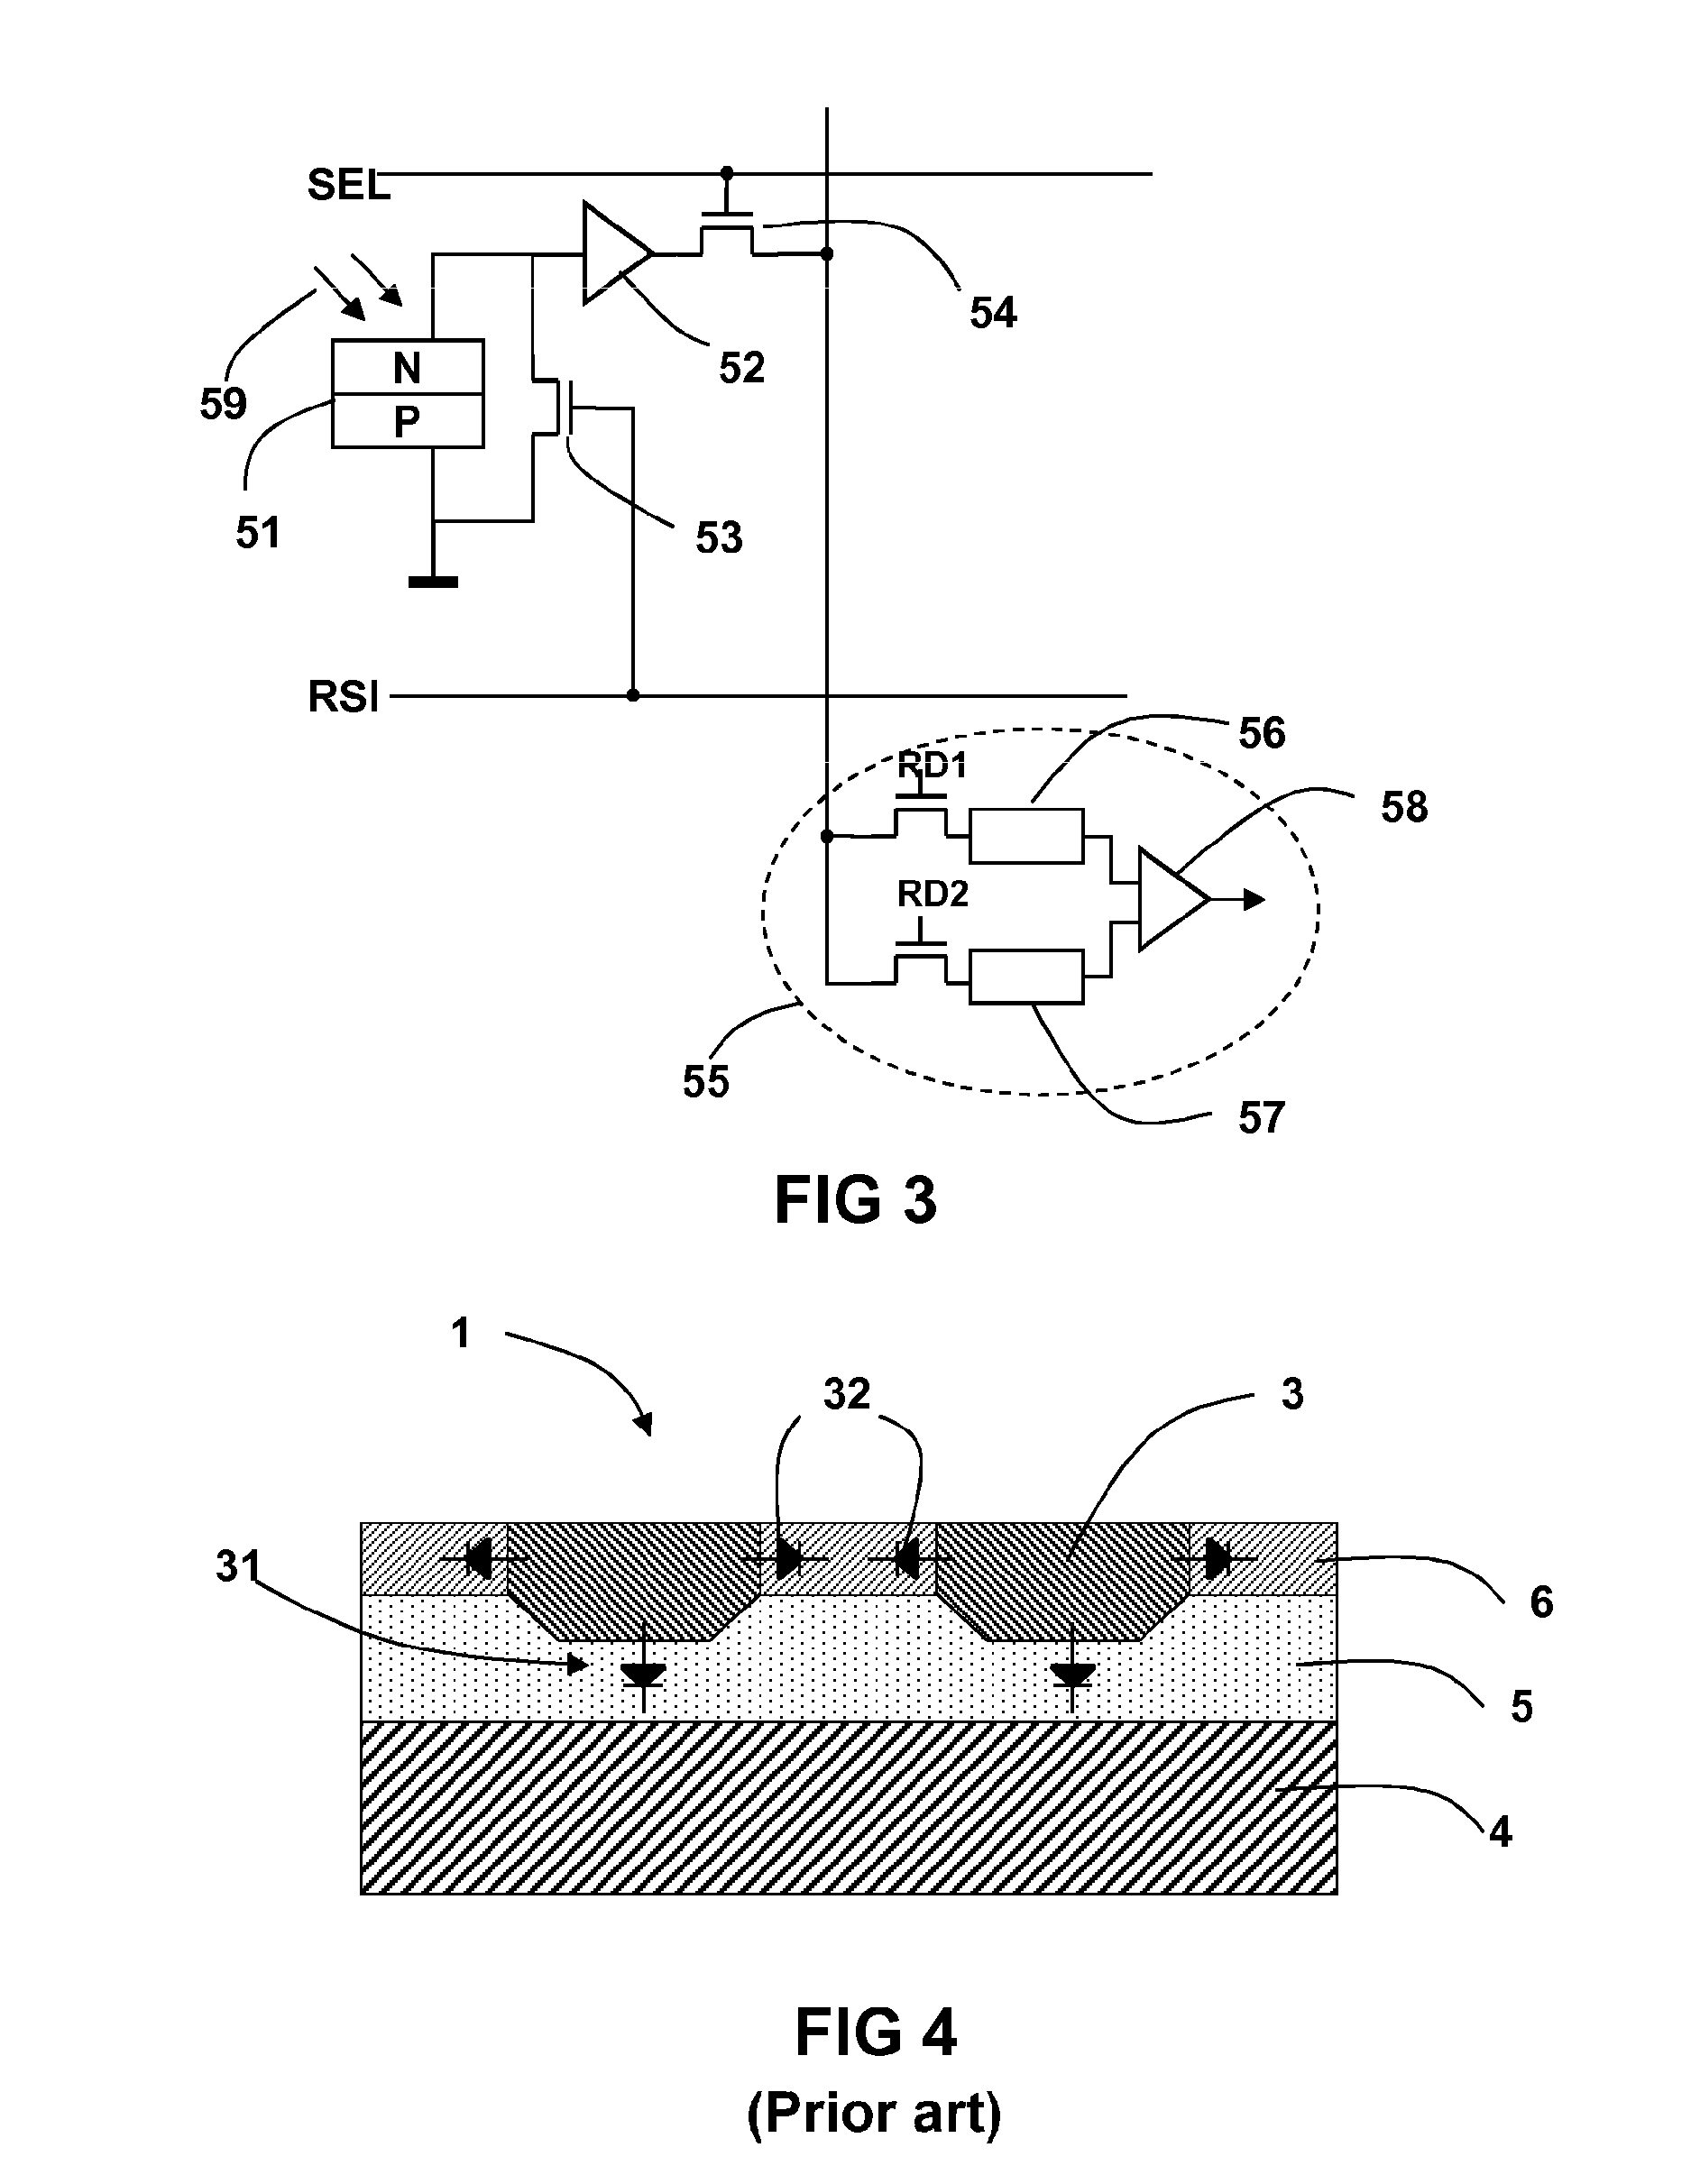 Photodiode array having a charge-absorbing doped region